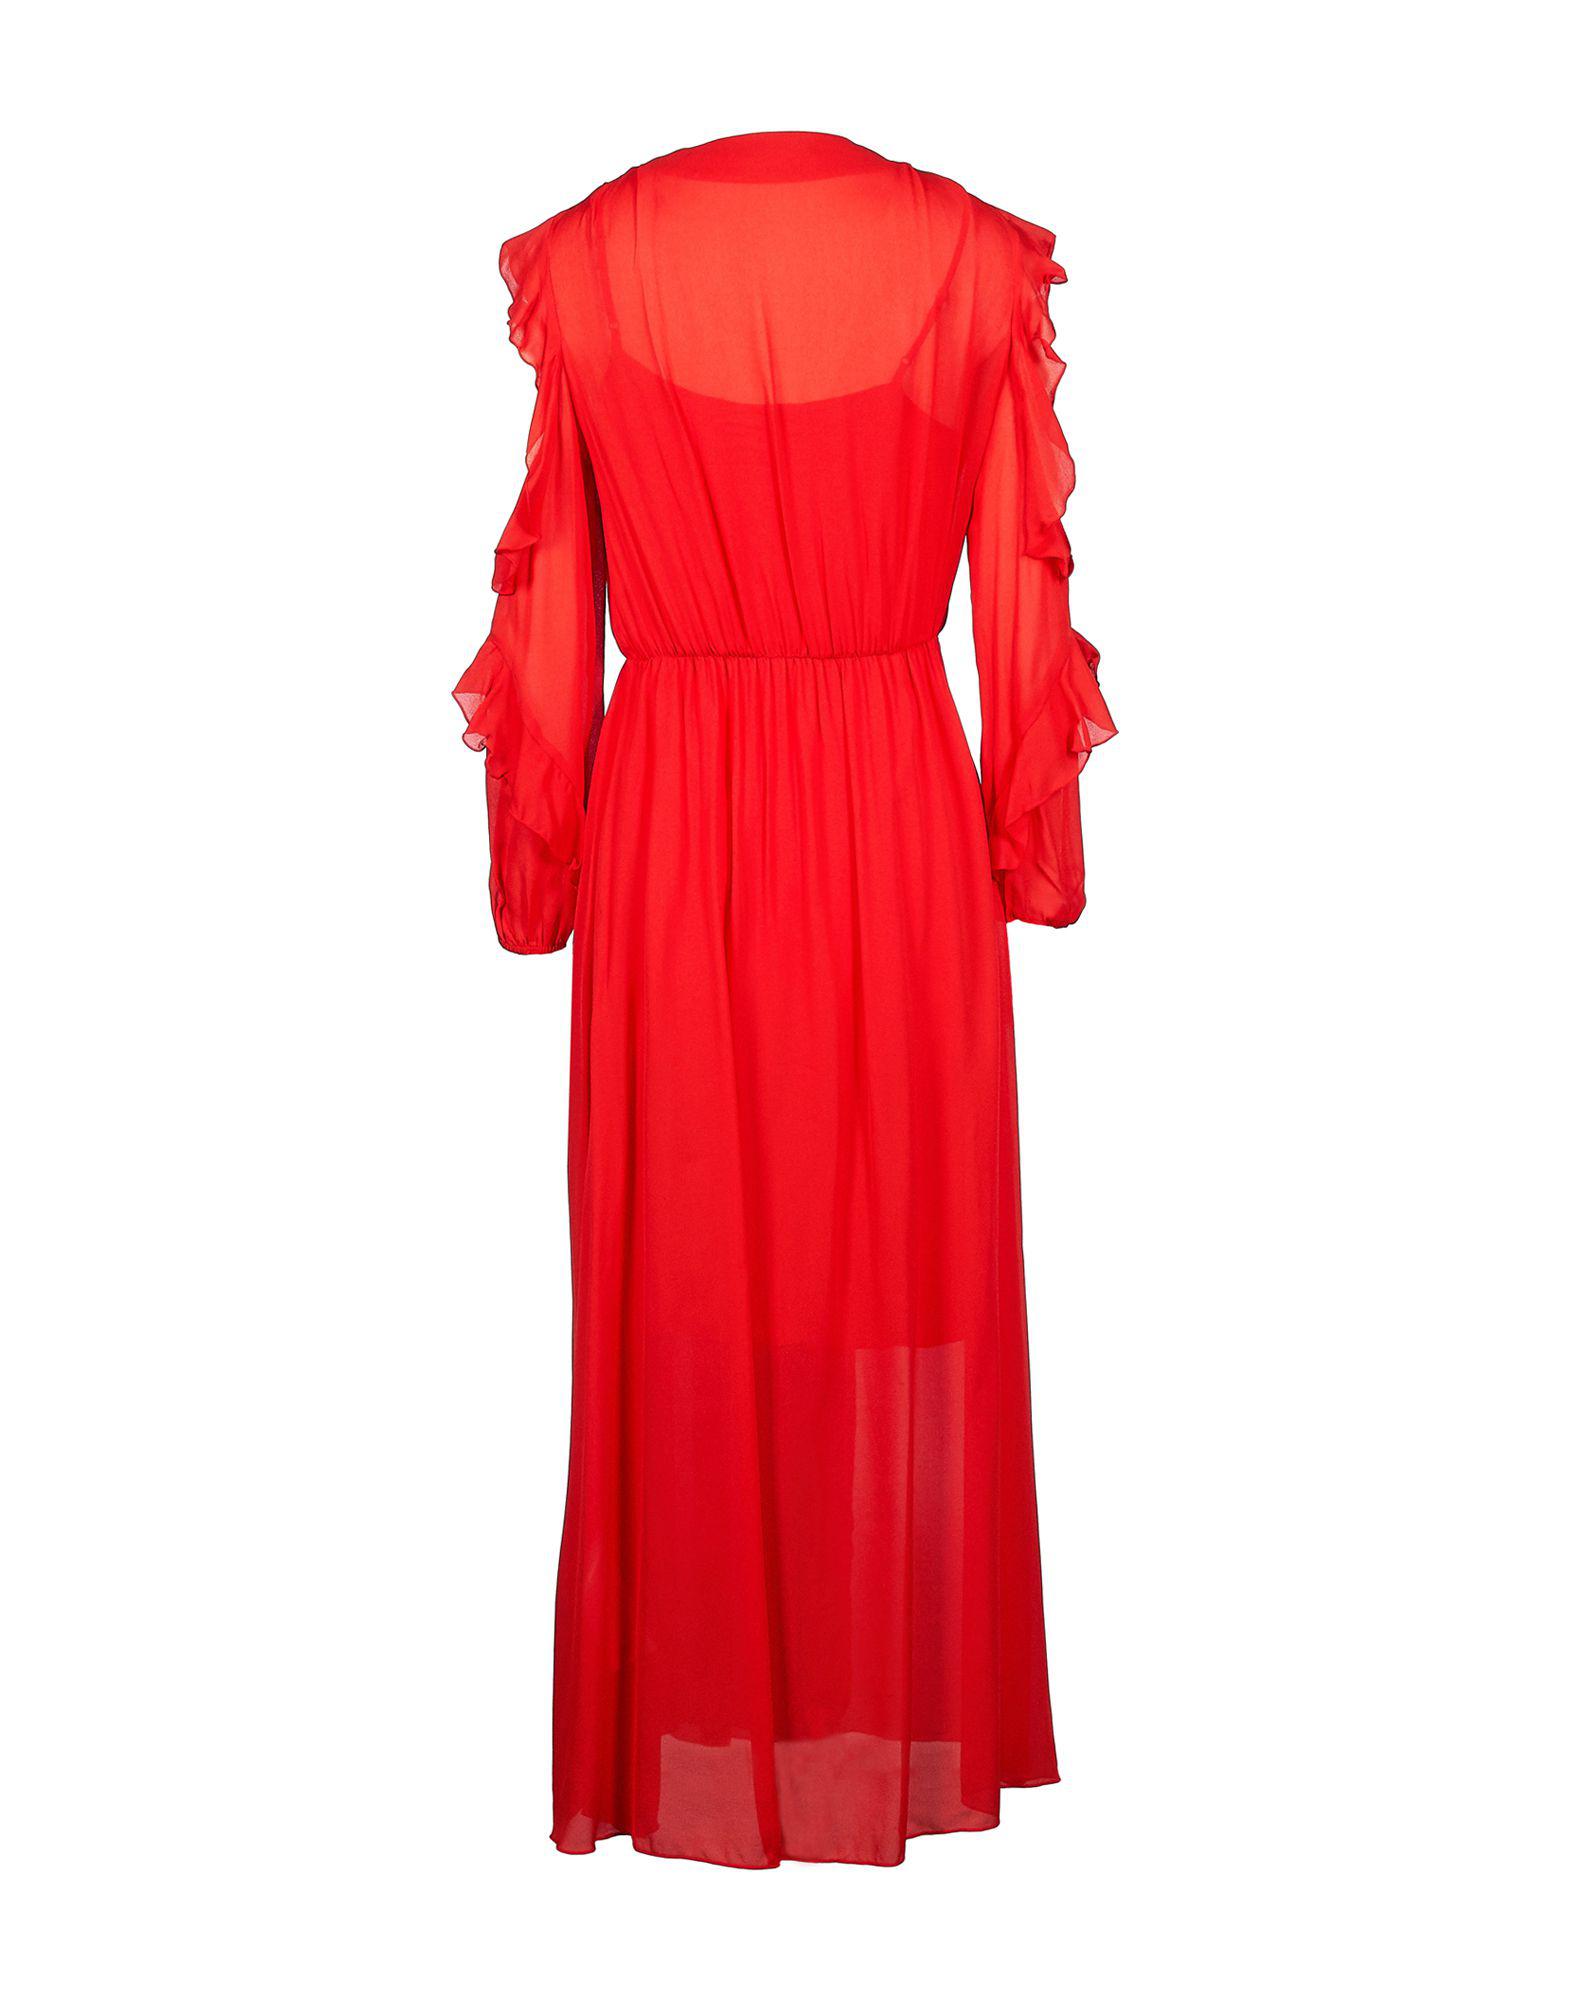 Maje Synthetic 3/4 Length Dress in Red - Lyst